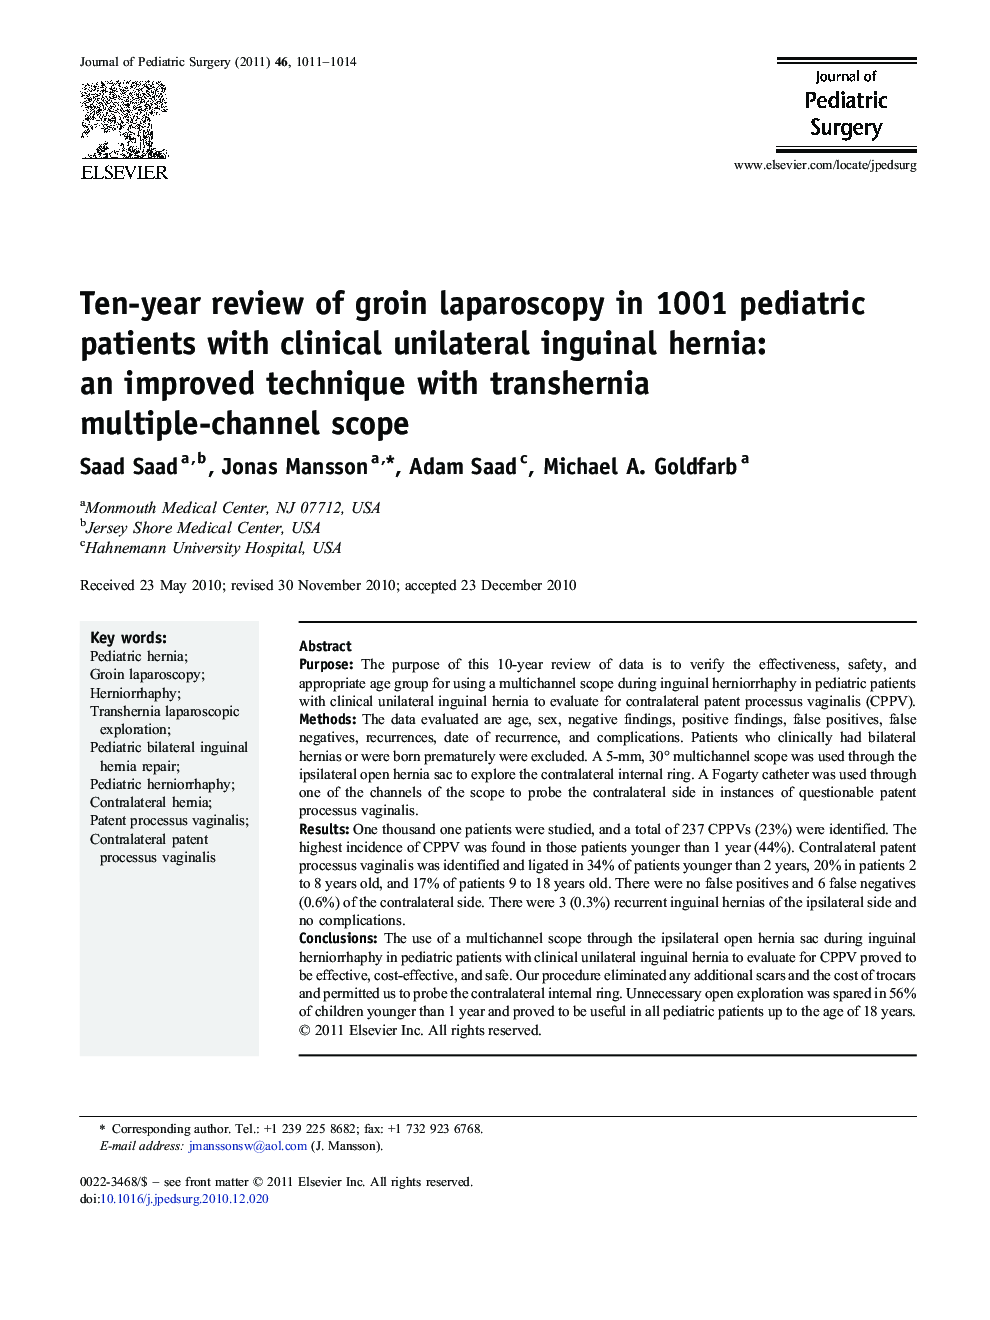 Ten-year review of groin laparoscopy in 1001 pediatric patients with clinical unilateral inguinal hernia: an improved technique with transhernia multiple-channel scope